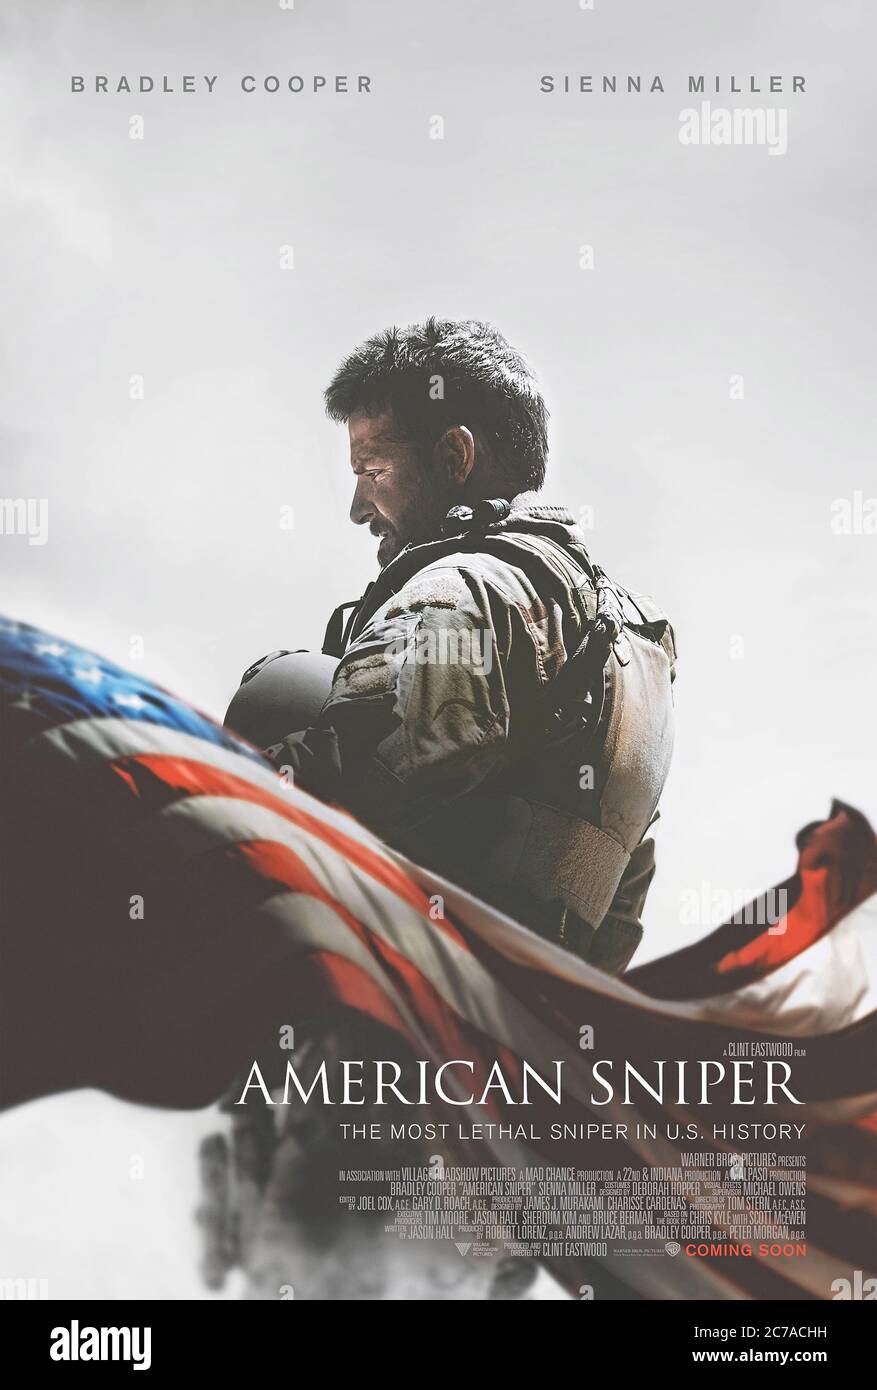 American Sniper (2014) directed by Clint Eastwood and starring Bradley Cooper, Sienna Miller and Kyle Gallner. Bio pic about legendary Navy S.E.A.L. sniper Chris Kyle who served 4 tours in Iraq and was one of the war's most deadly snipers. Stock Photo